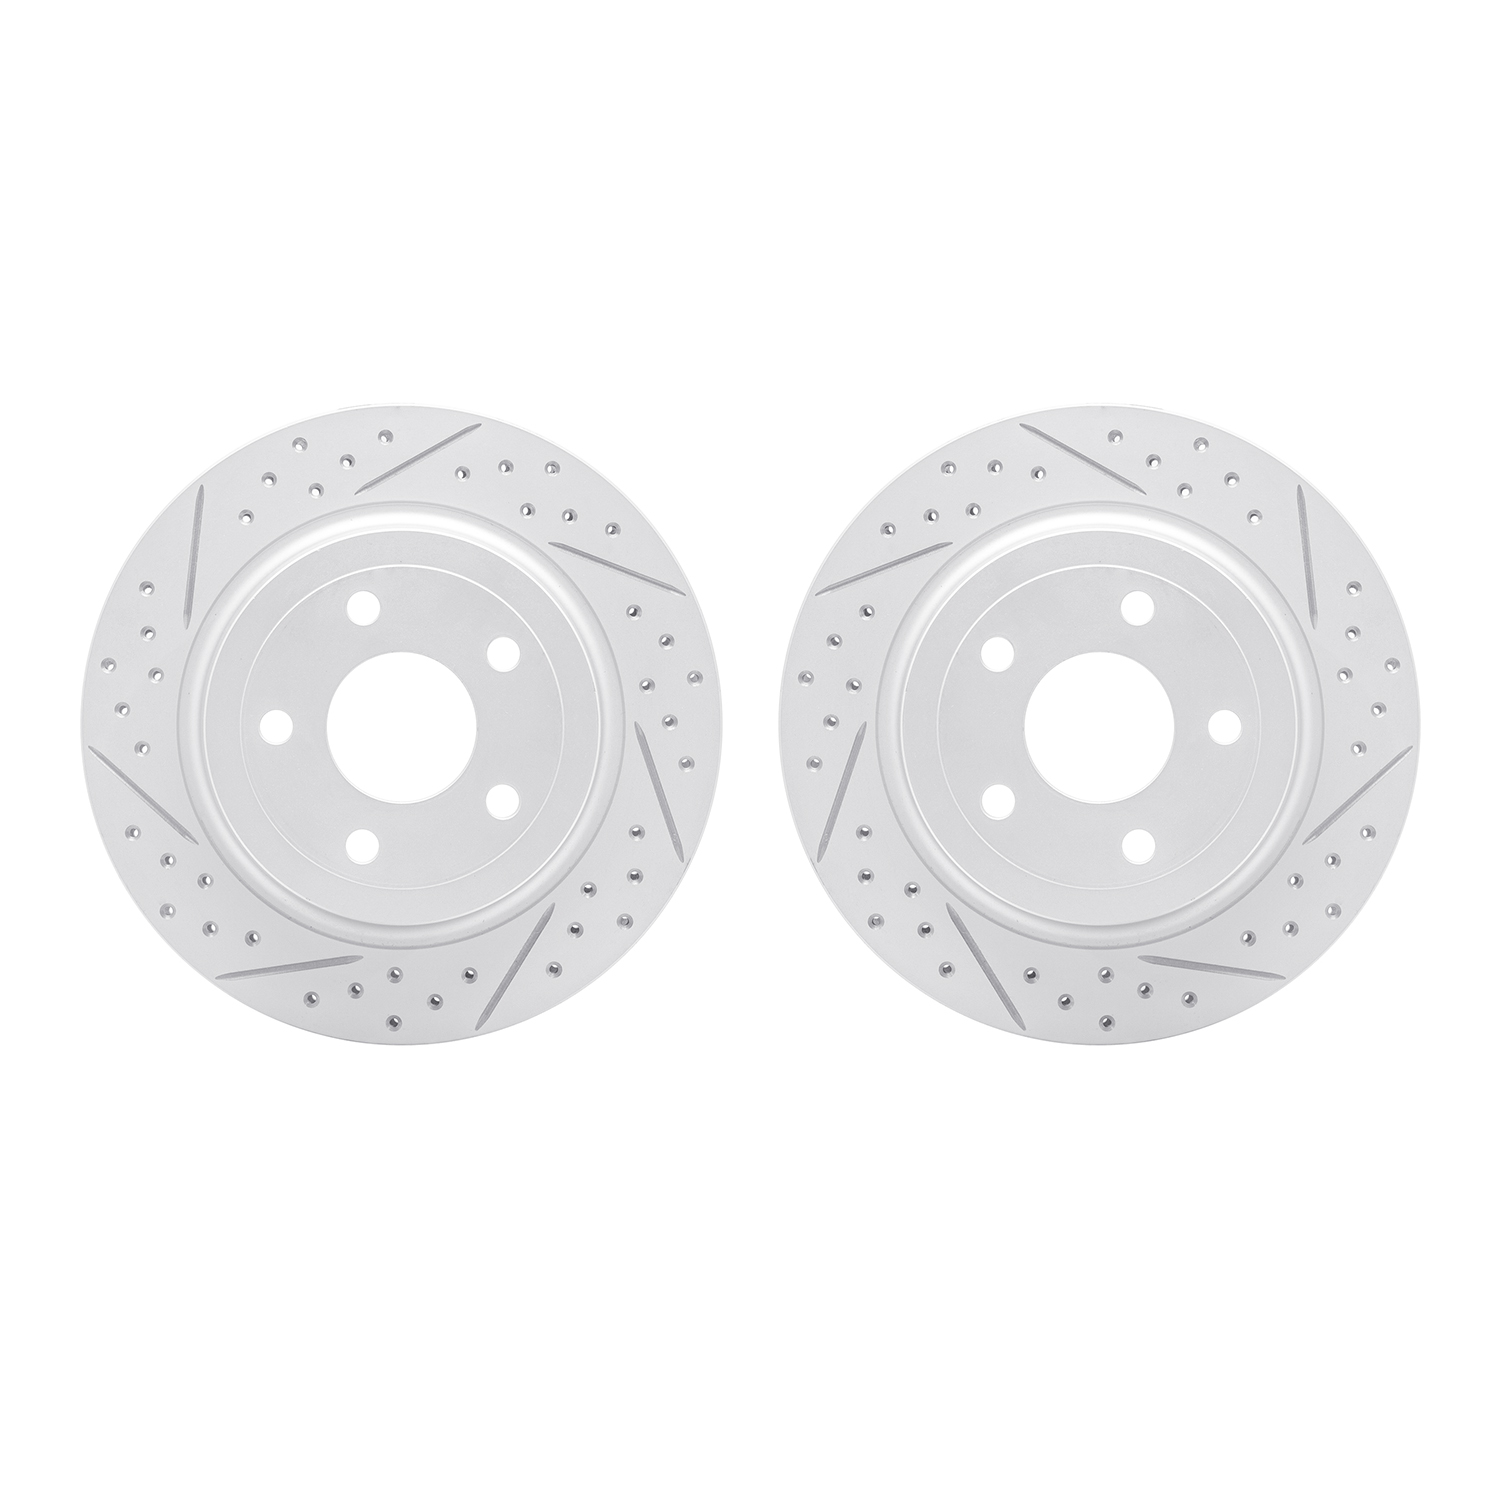 2002-47039 Geoperformance Drilled/Slotted Brake Rotors, 2008-2010 GM, Position: Rear